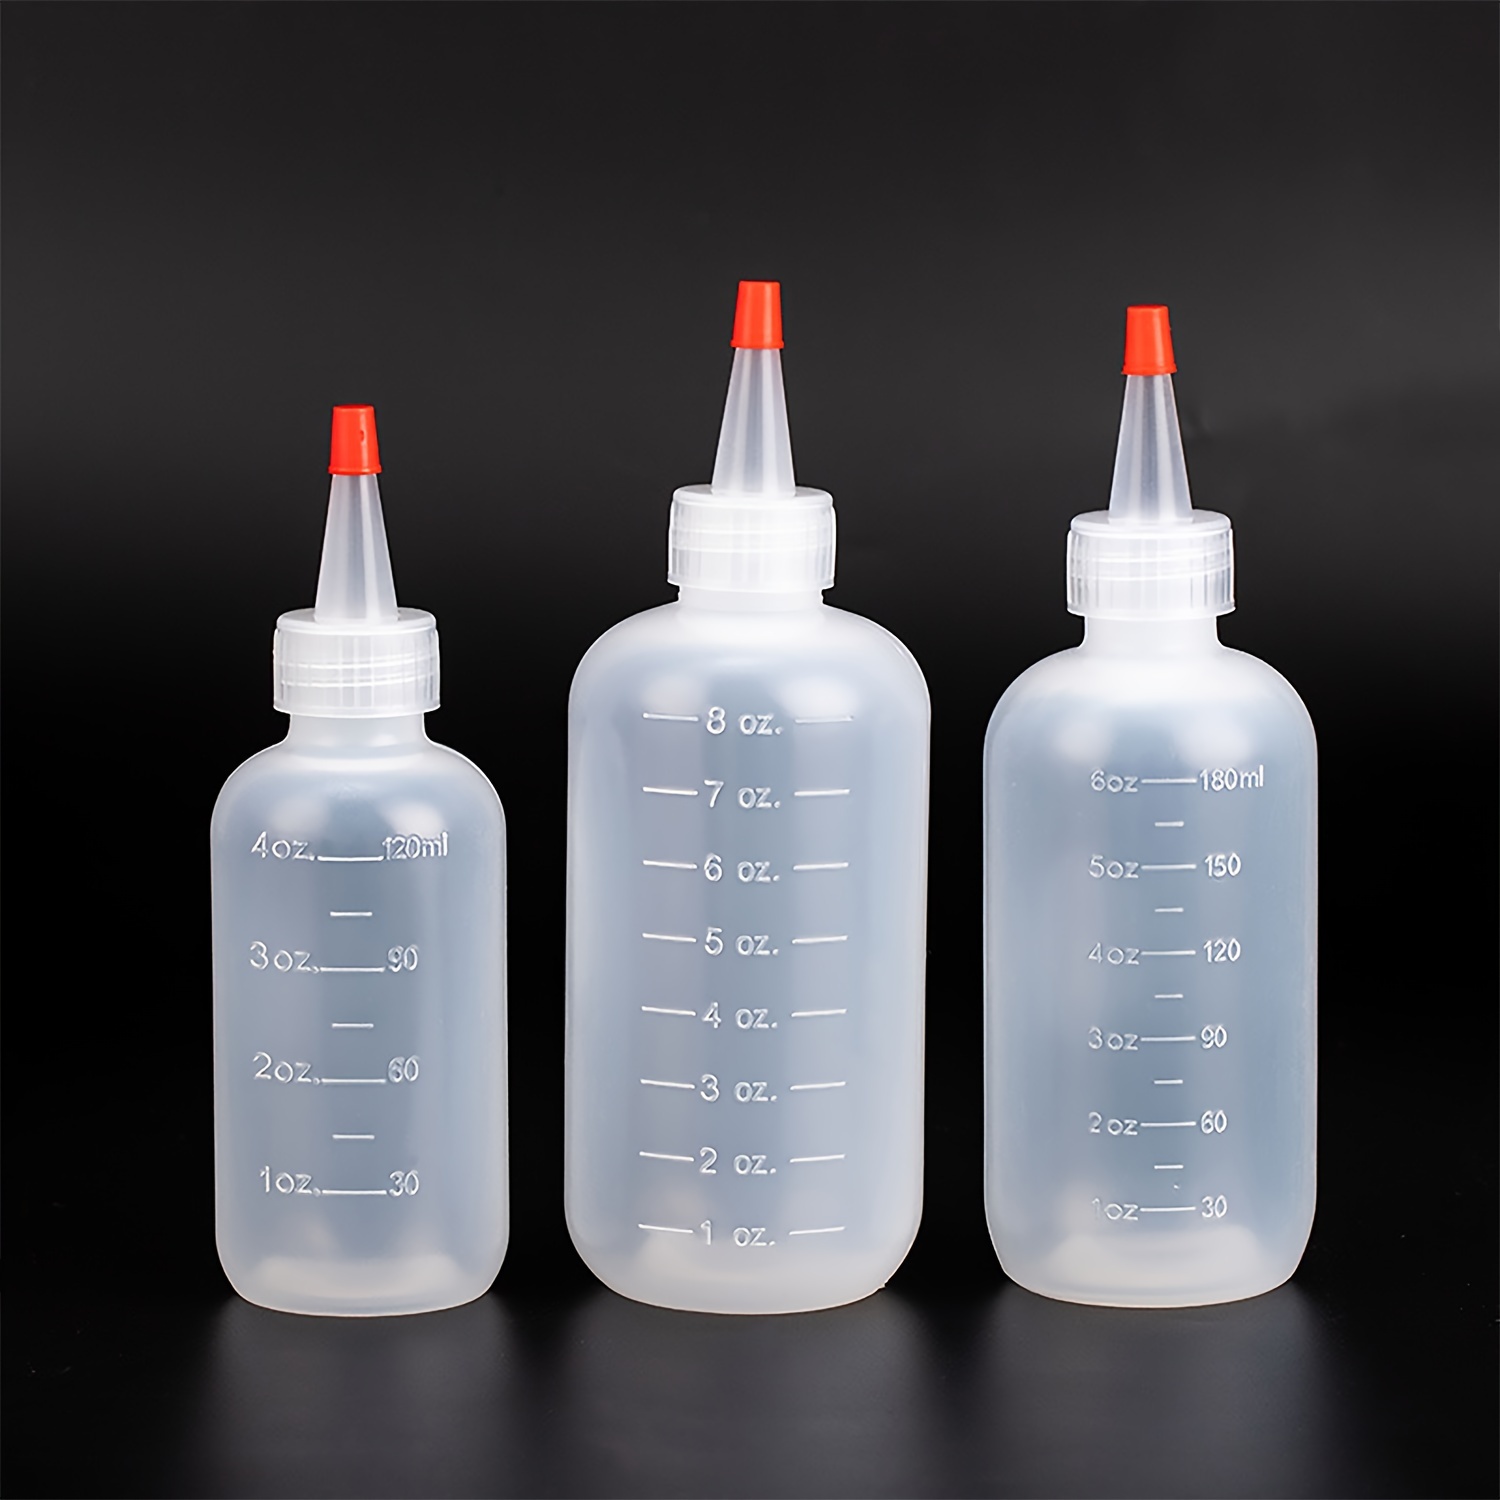 

3-pack Transparent Plastic Squeeze Bottles With Red Caps And Measurement Markings - Unscented, Round Shape, Hand Wash Only - Ideal For Dispensing Liquids And Condiments